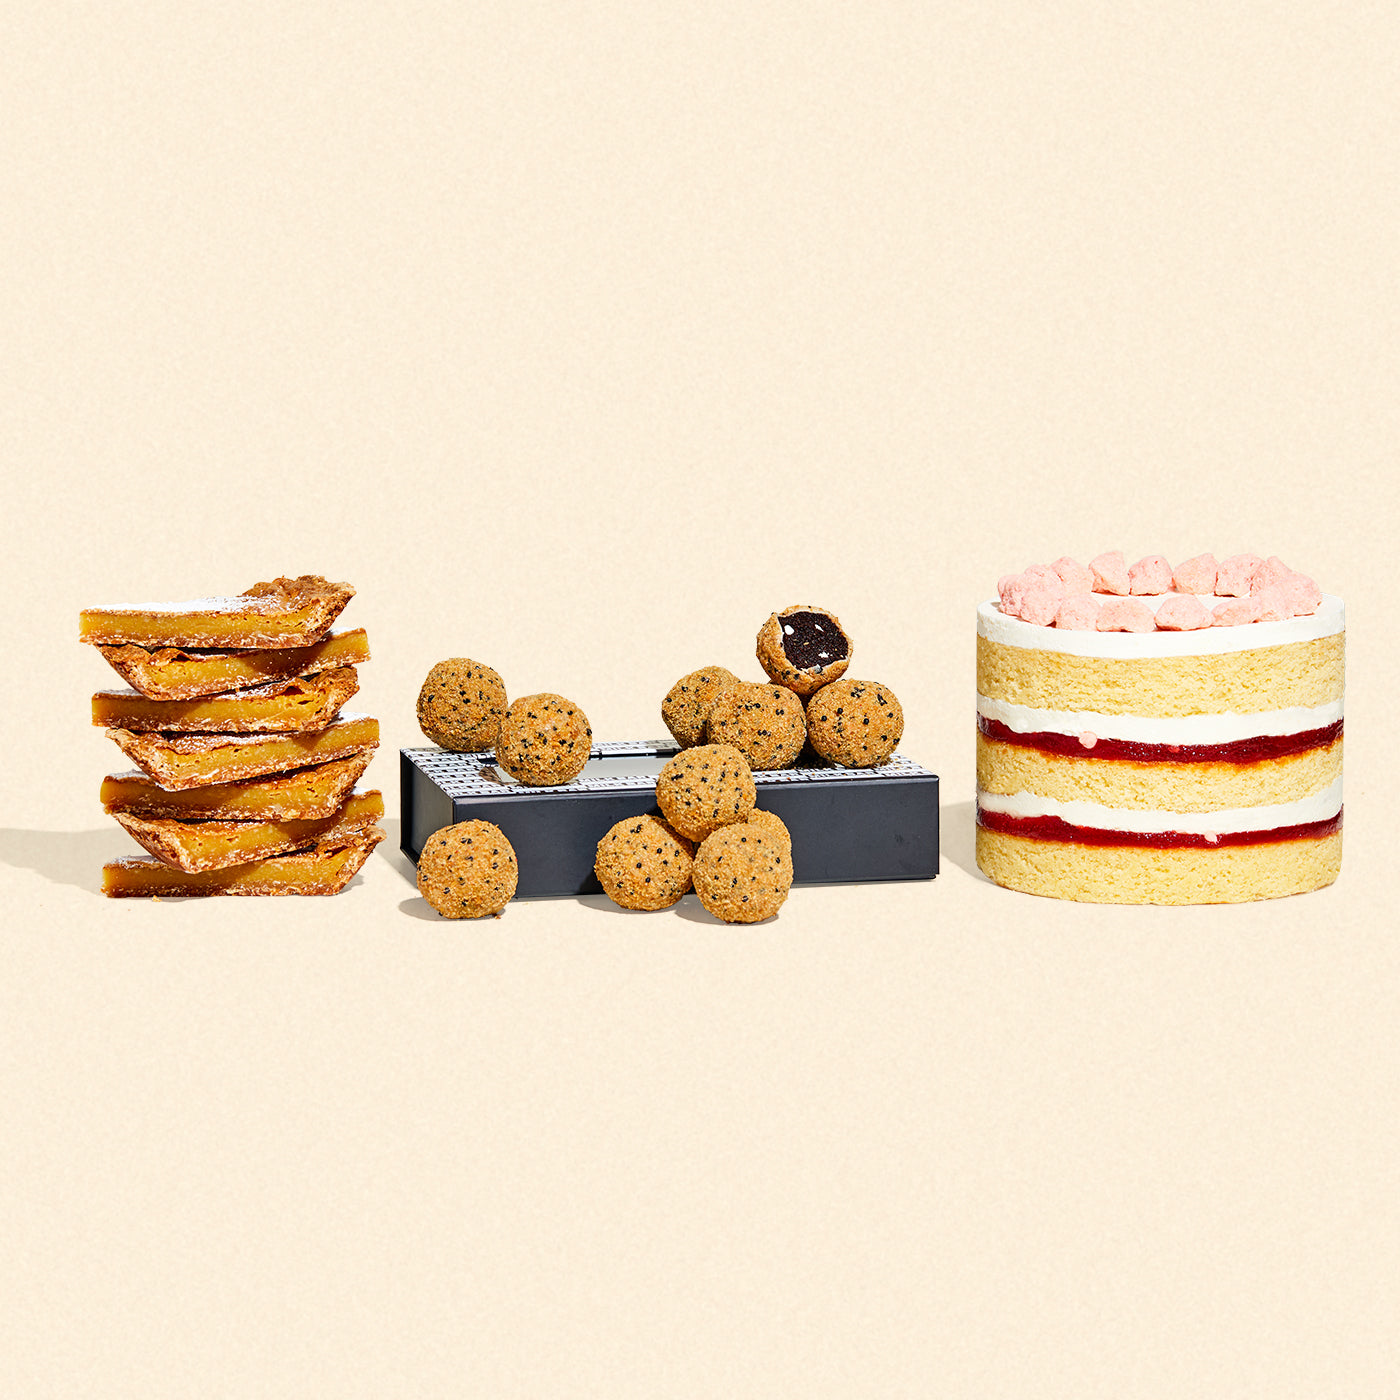 A whole 6 inch strawberry shortcake, a giftable dozen box of s'mores cake truffles, and a stack of milk bar pie slices all side-by-side.